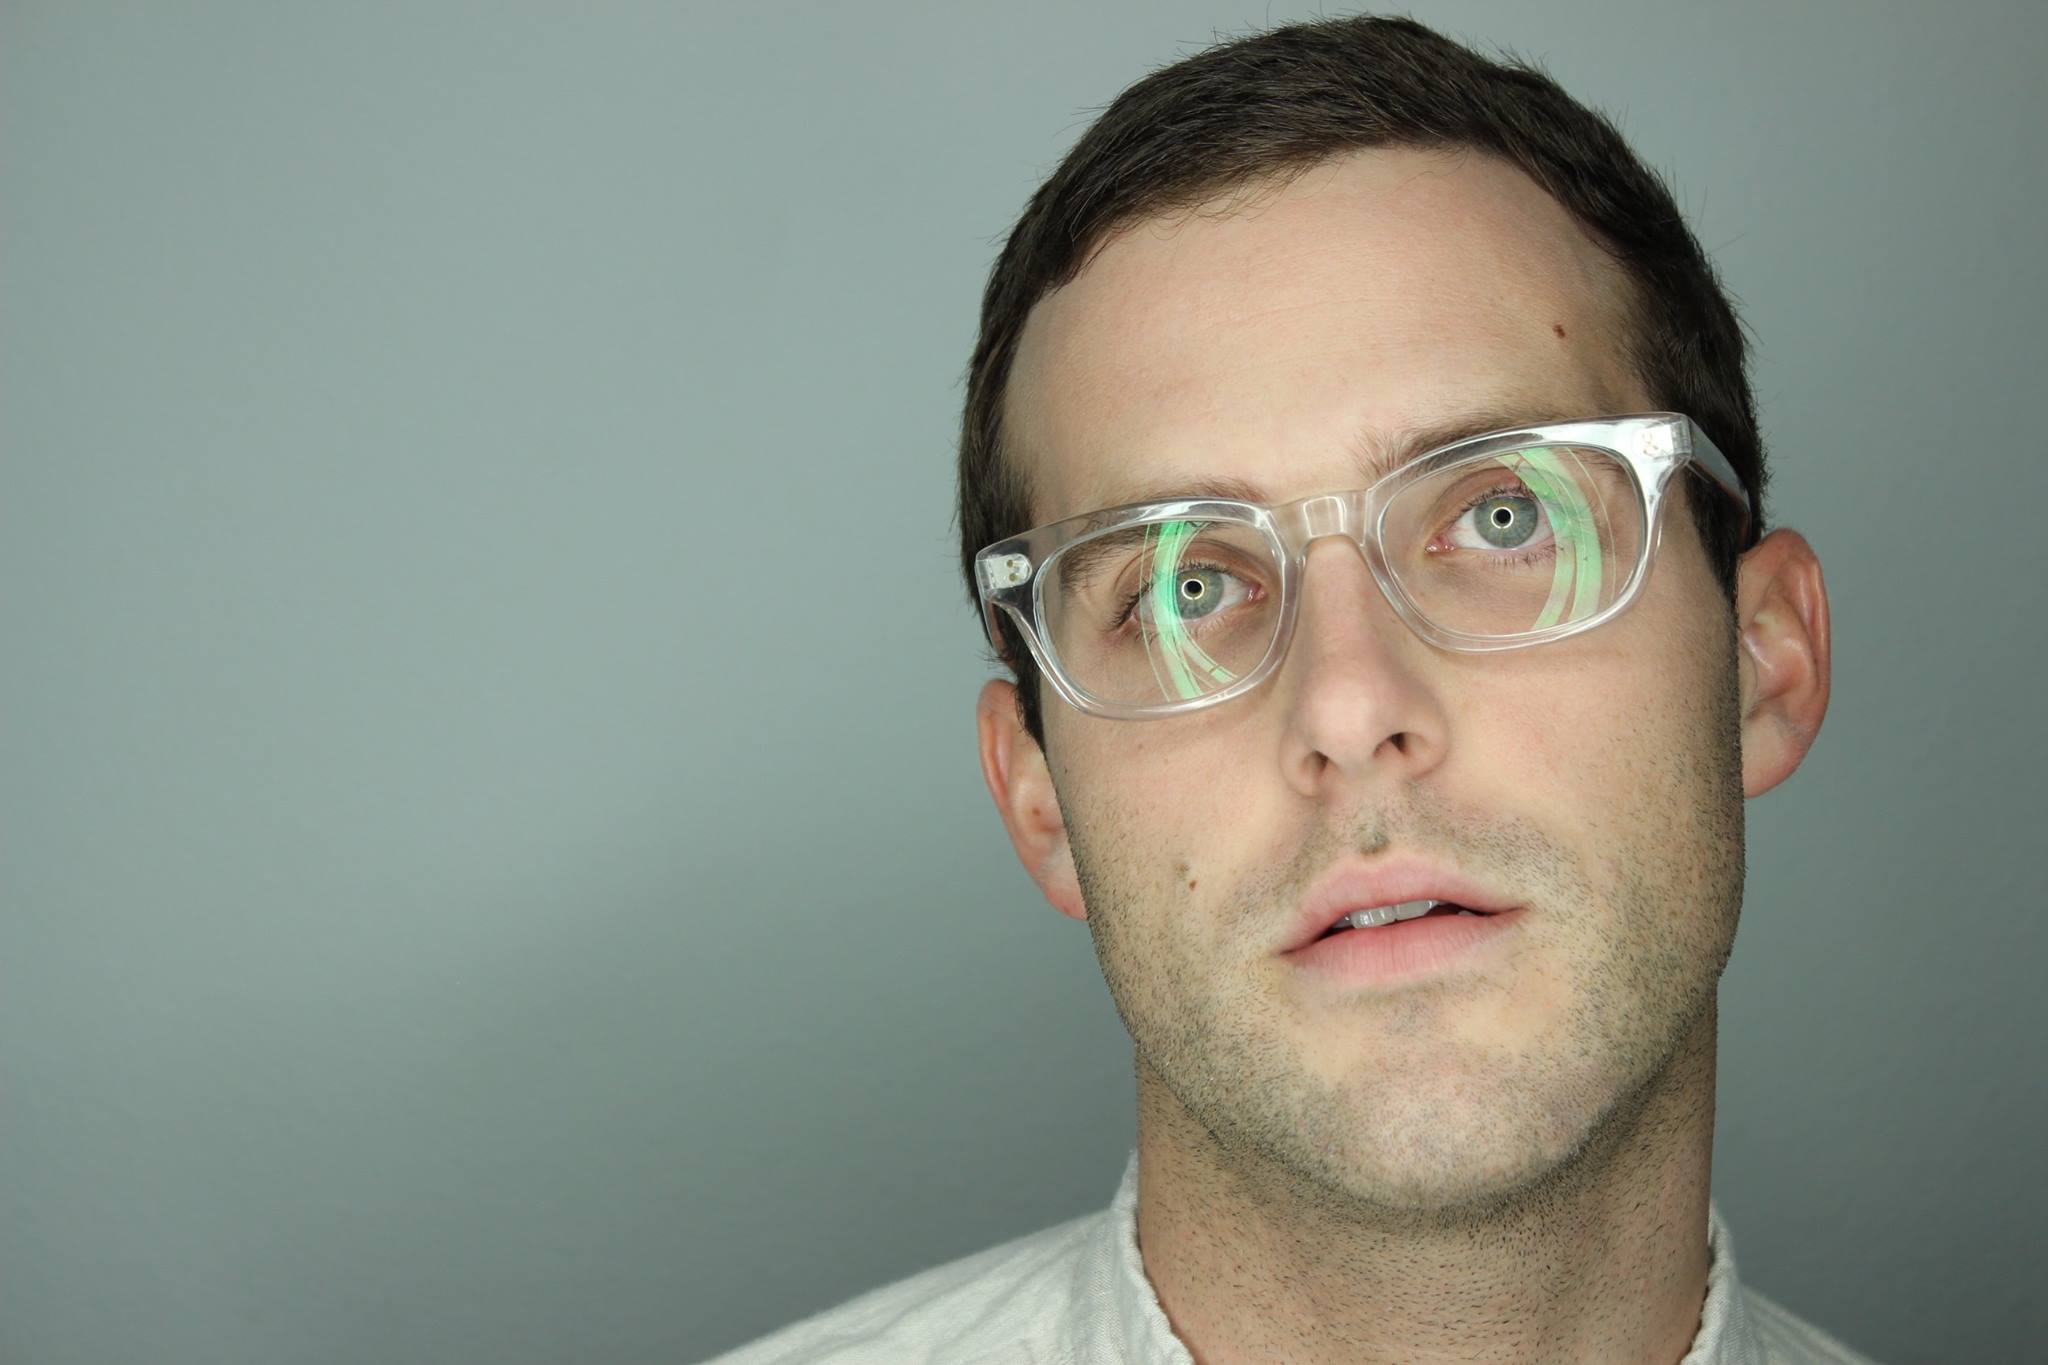 Video: Baths - "Out"